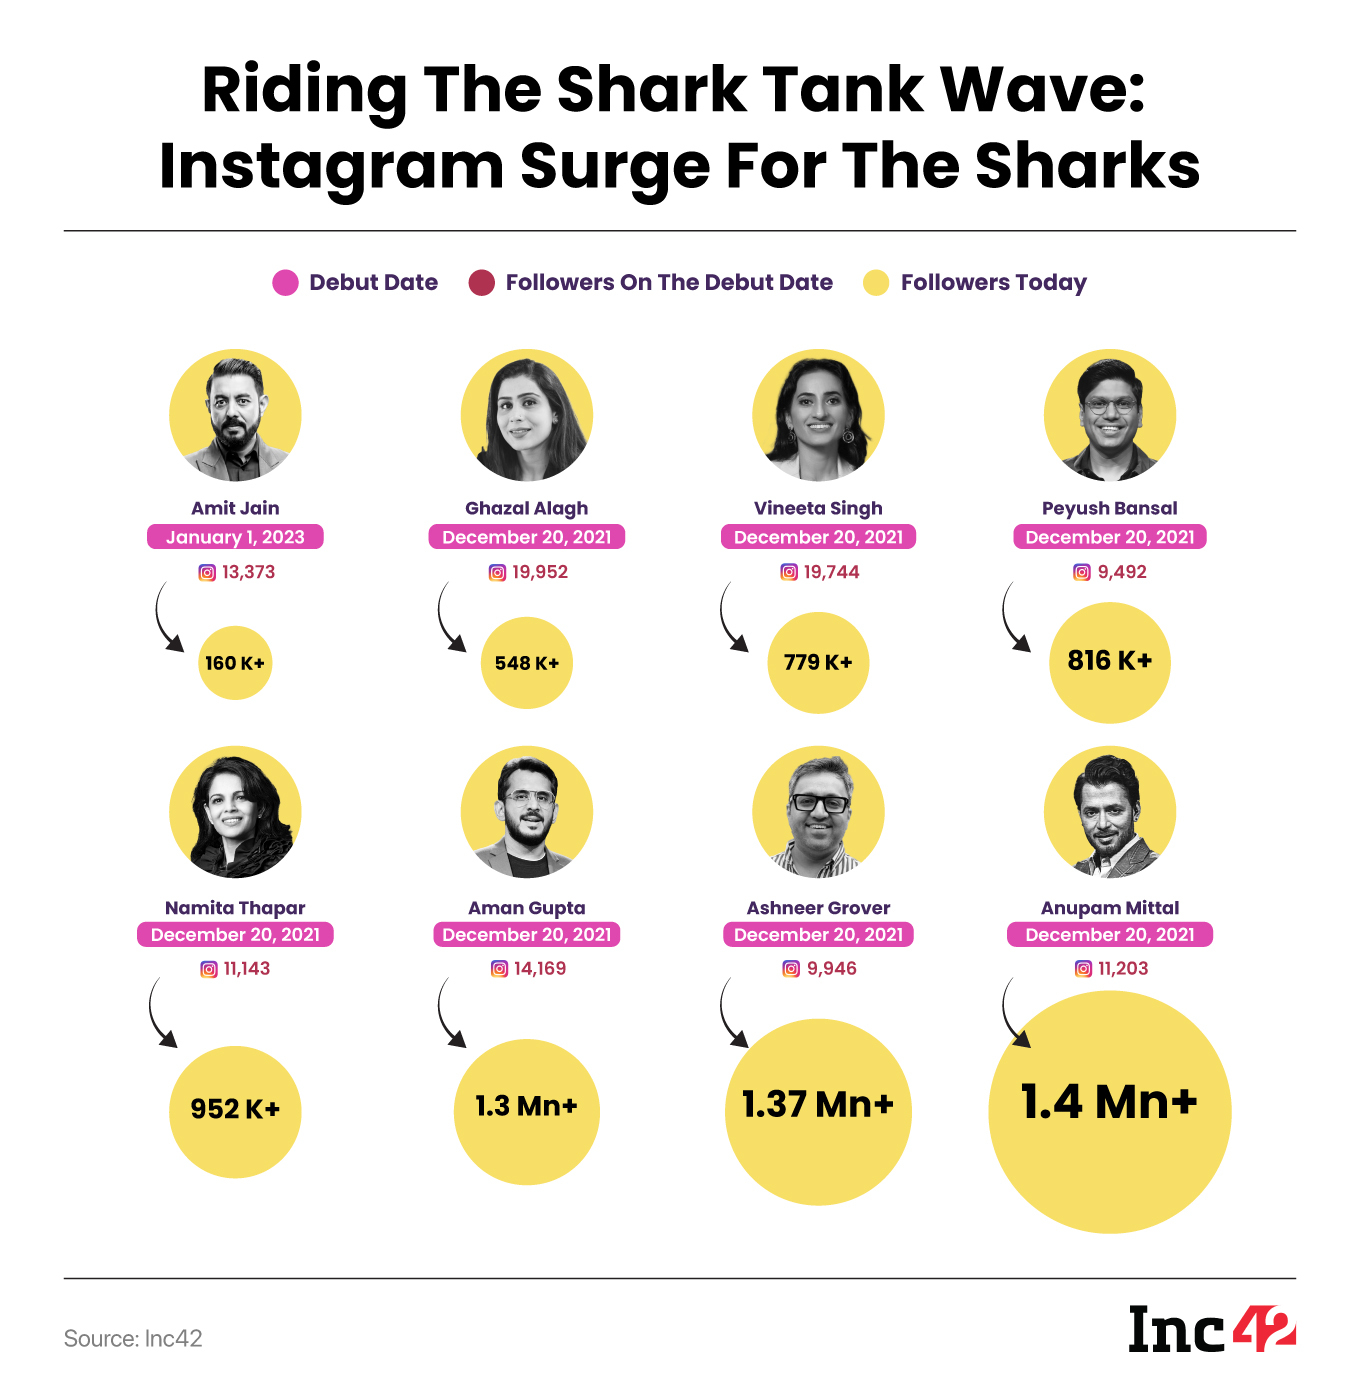 boAt’s CEO Aman Gupta, whose Instagram followers have jumped to over 1.3 Mn from a mere 14,169 followers when “Shark Tank India” made its debut in 2021.